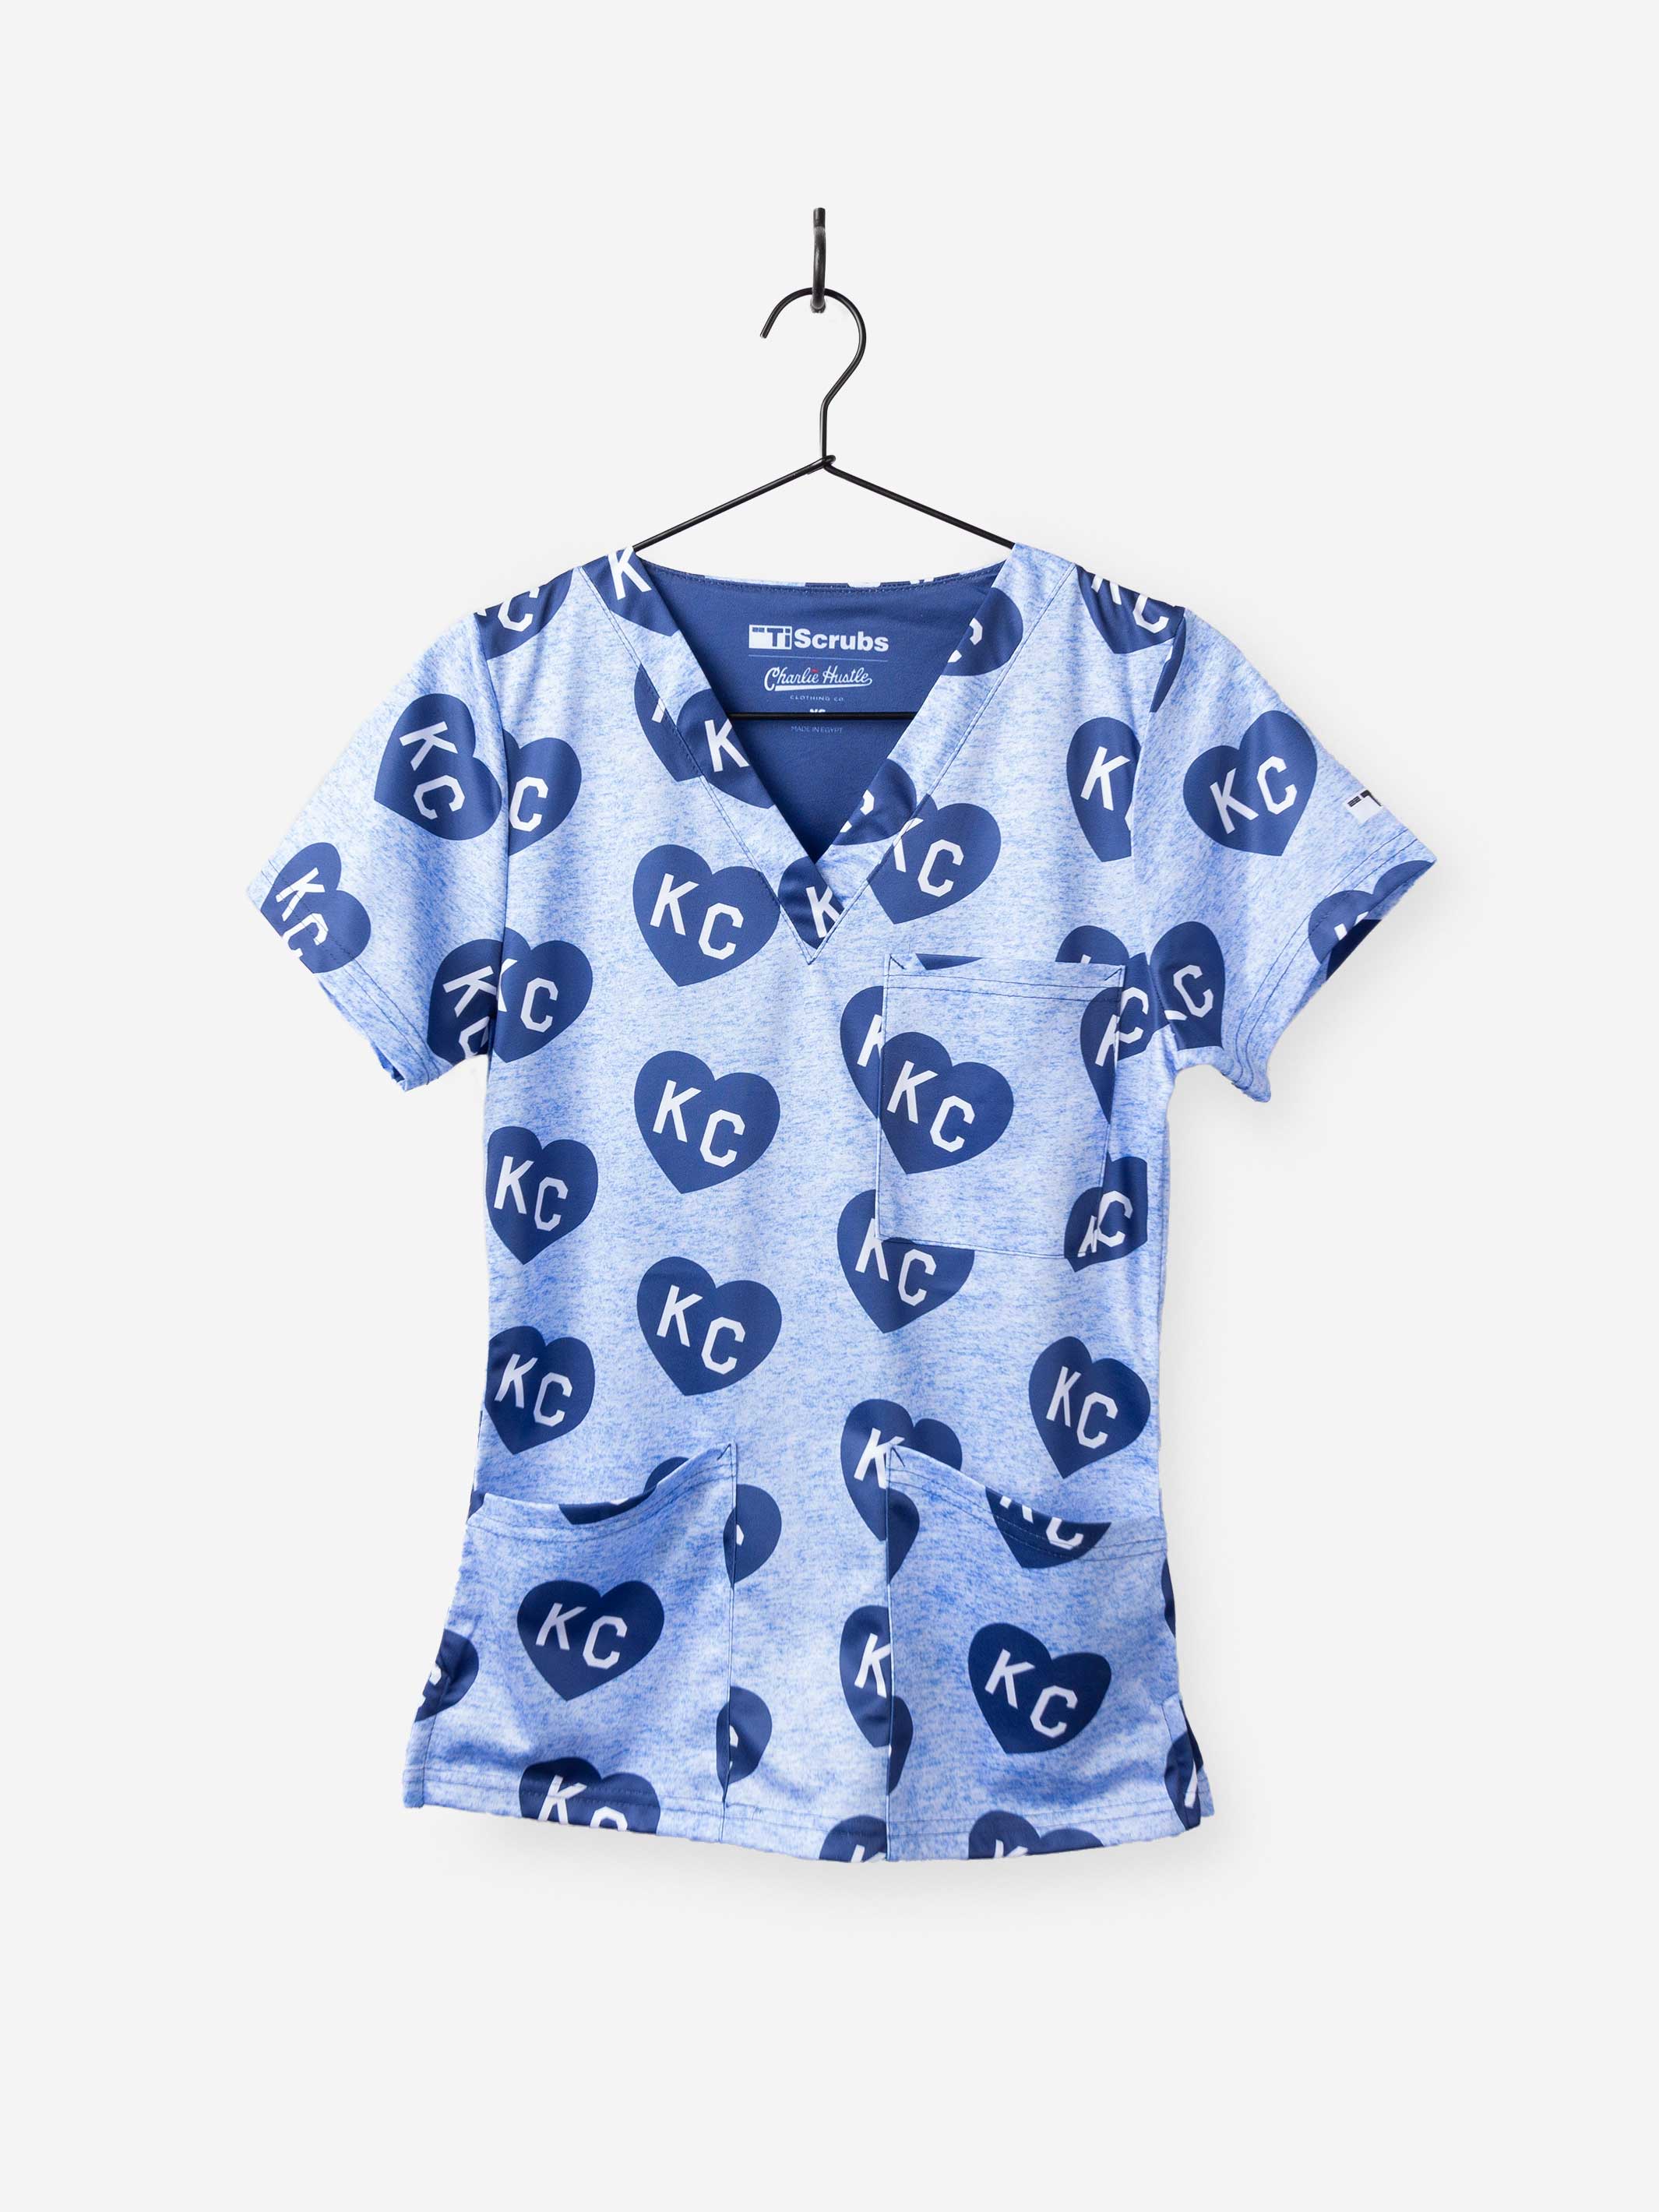 Women&#39;s Charlie Hustle Print Scrub Top in Navy and Ceil Blue with 3 Pockets KC Heart Print